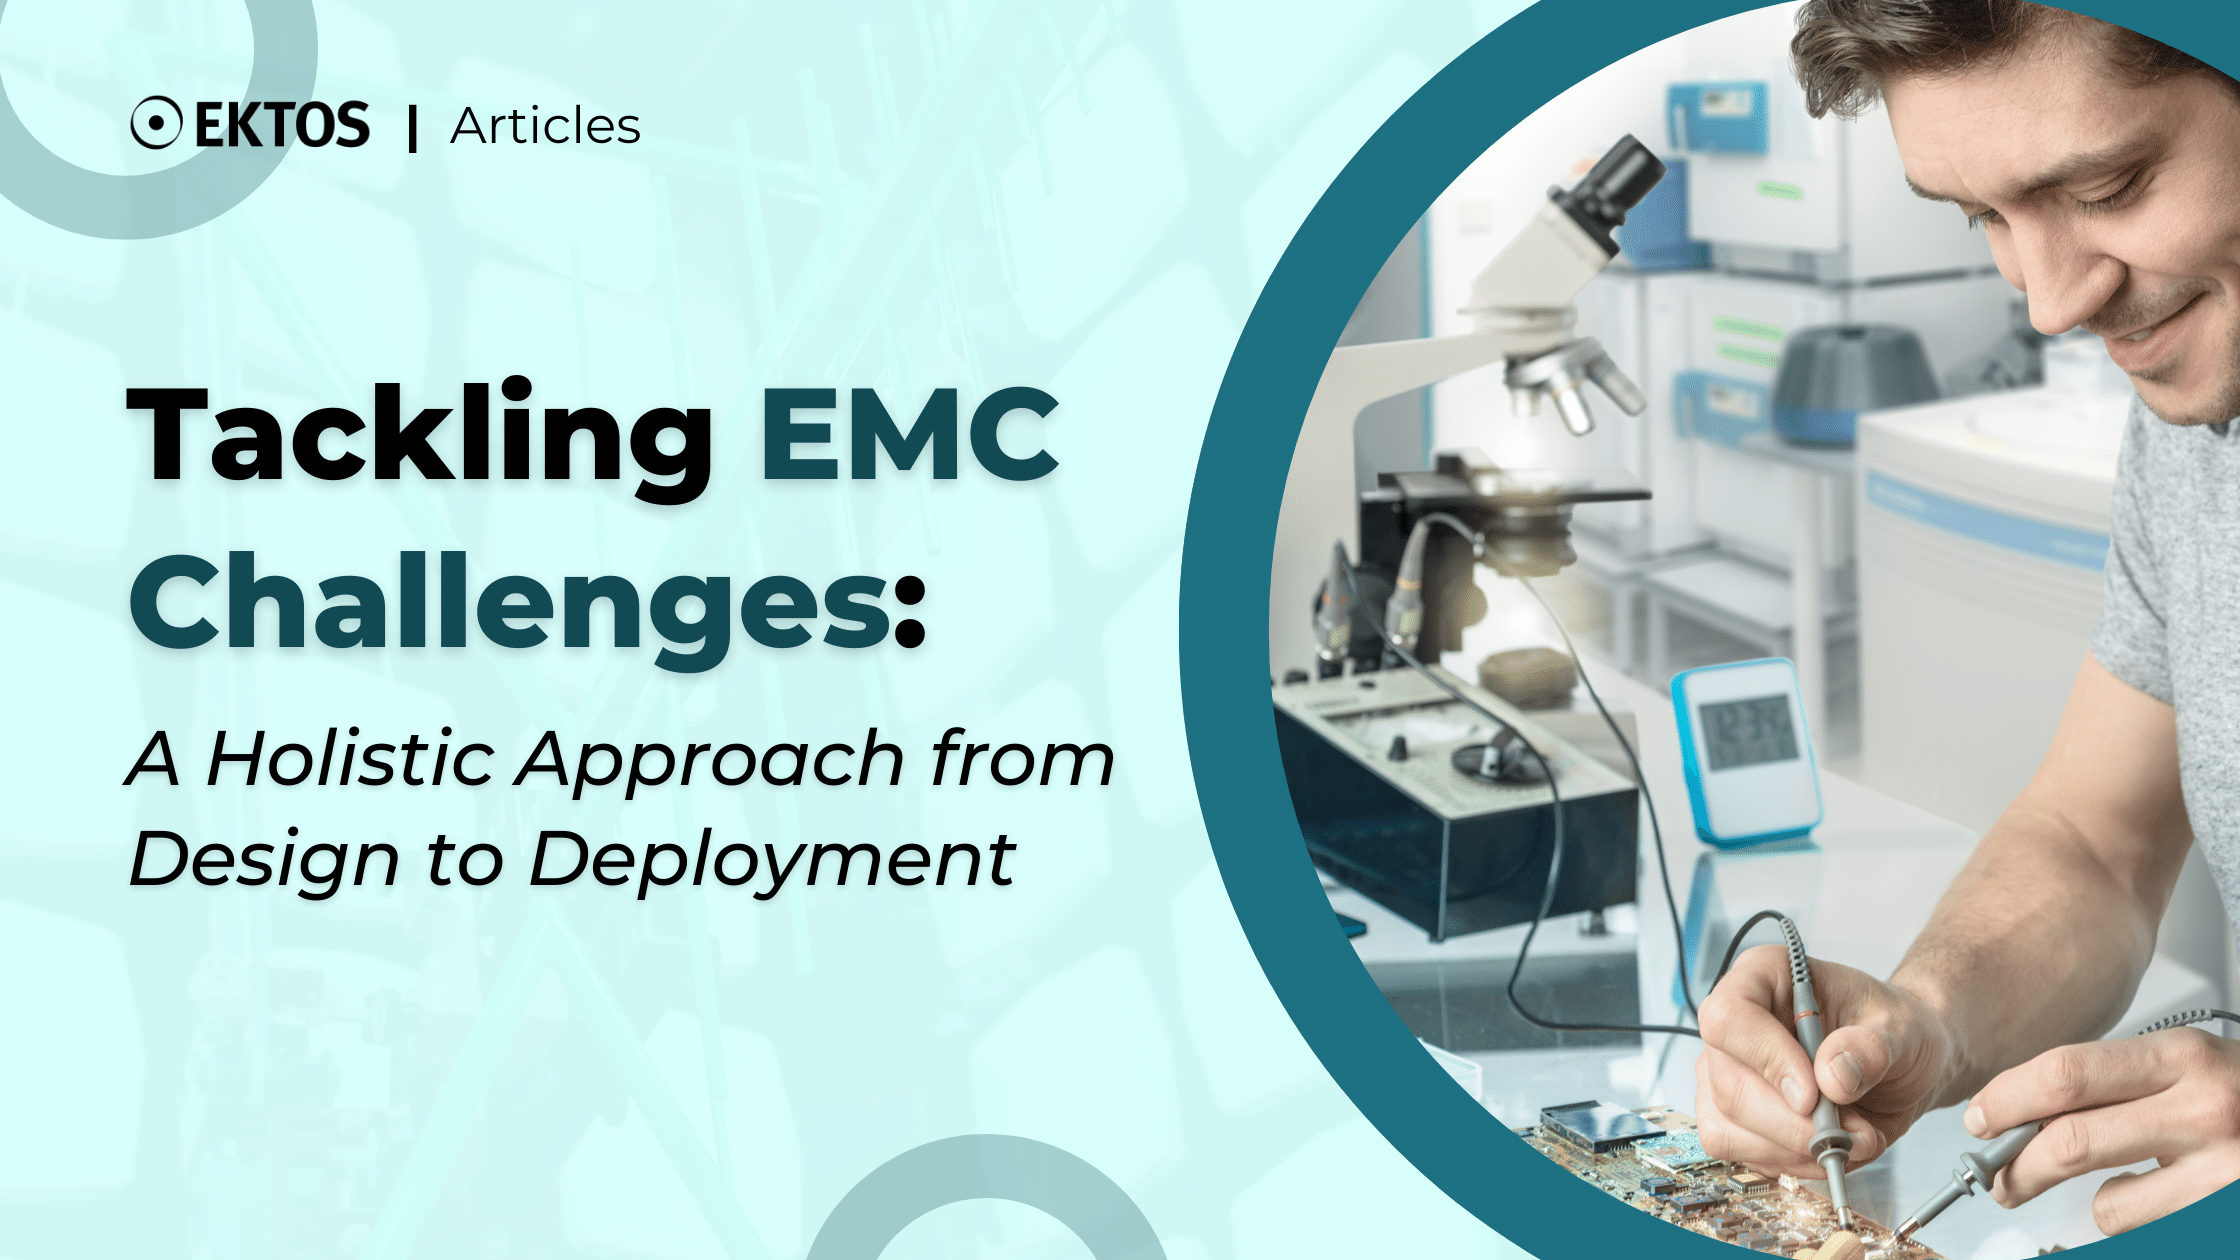 Tackling EMC Challenges: A Holistic Approach from Design to Deployment